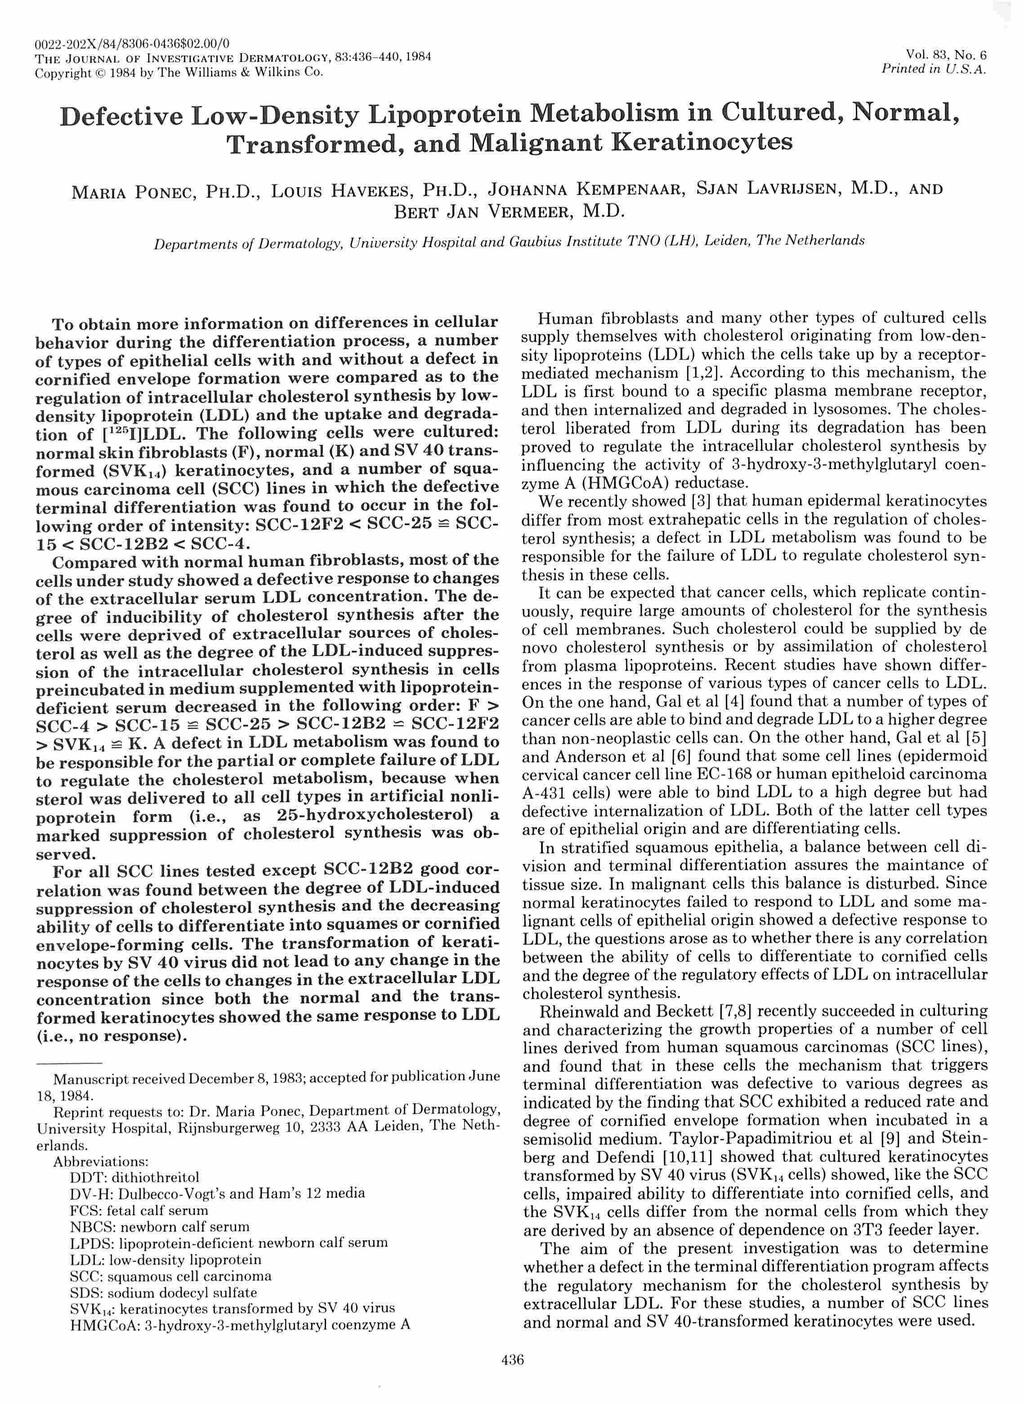 22-22X/84/836-436$2./ THE J OU RNA L OF I NVESTtr.AT IVE D ER MATOLOGY, 83:436-44,! 984 Copyright 1984 by The Willia ms & Wilkins Co. Vol. 83, No.6 Printed in U.S.A. Defetive Low-Density Lipoprotein Metabolism in Cultured, Normal, Transformed, and Malignant Keratinoytes MARIA PONEC, PH.